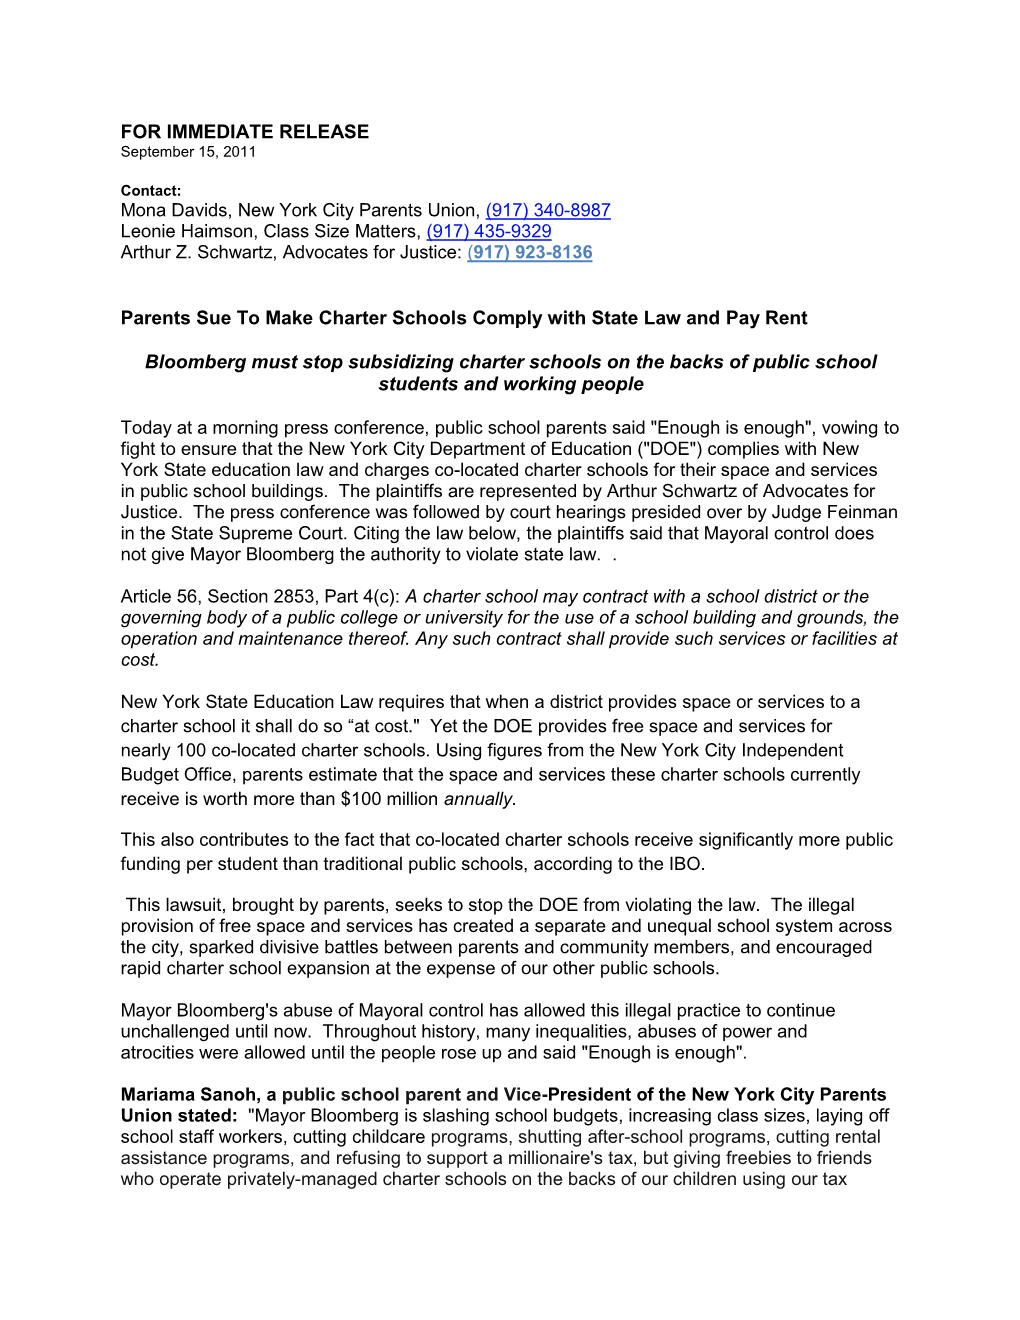 FOR IMMEDIATE RELEASE Parents Sue to Make Charter Schools